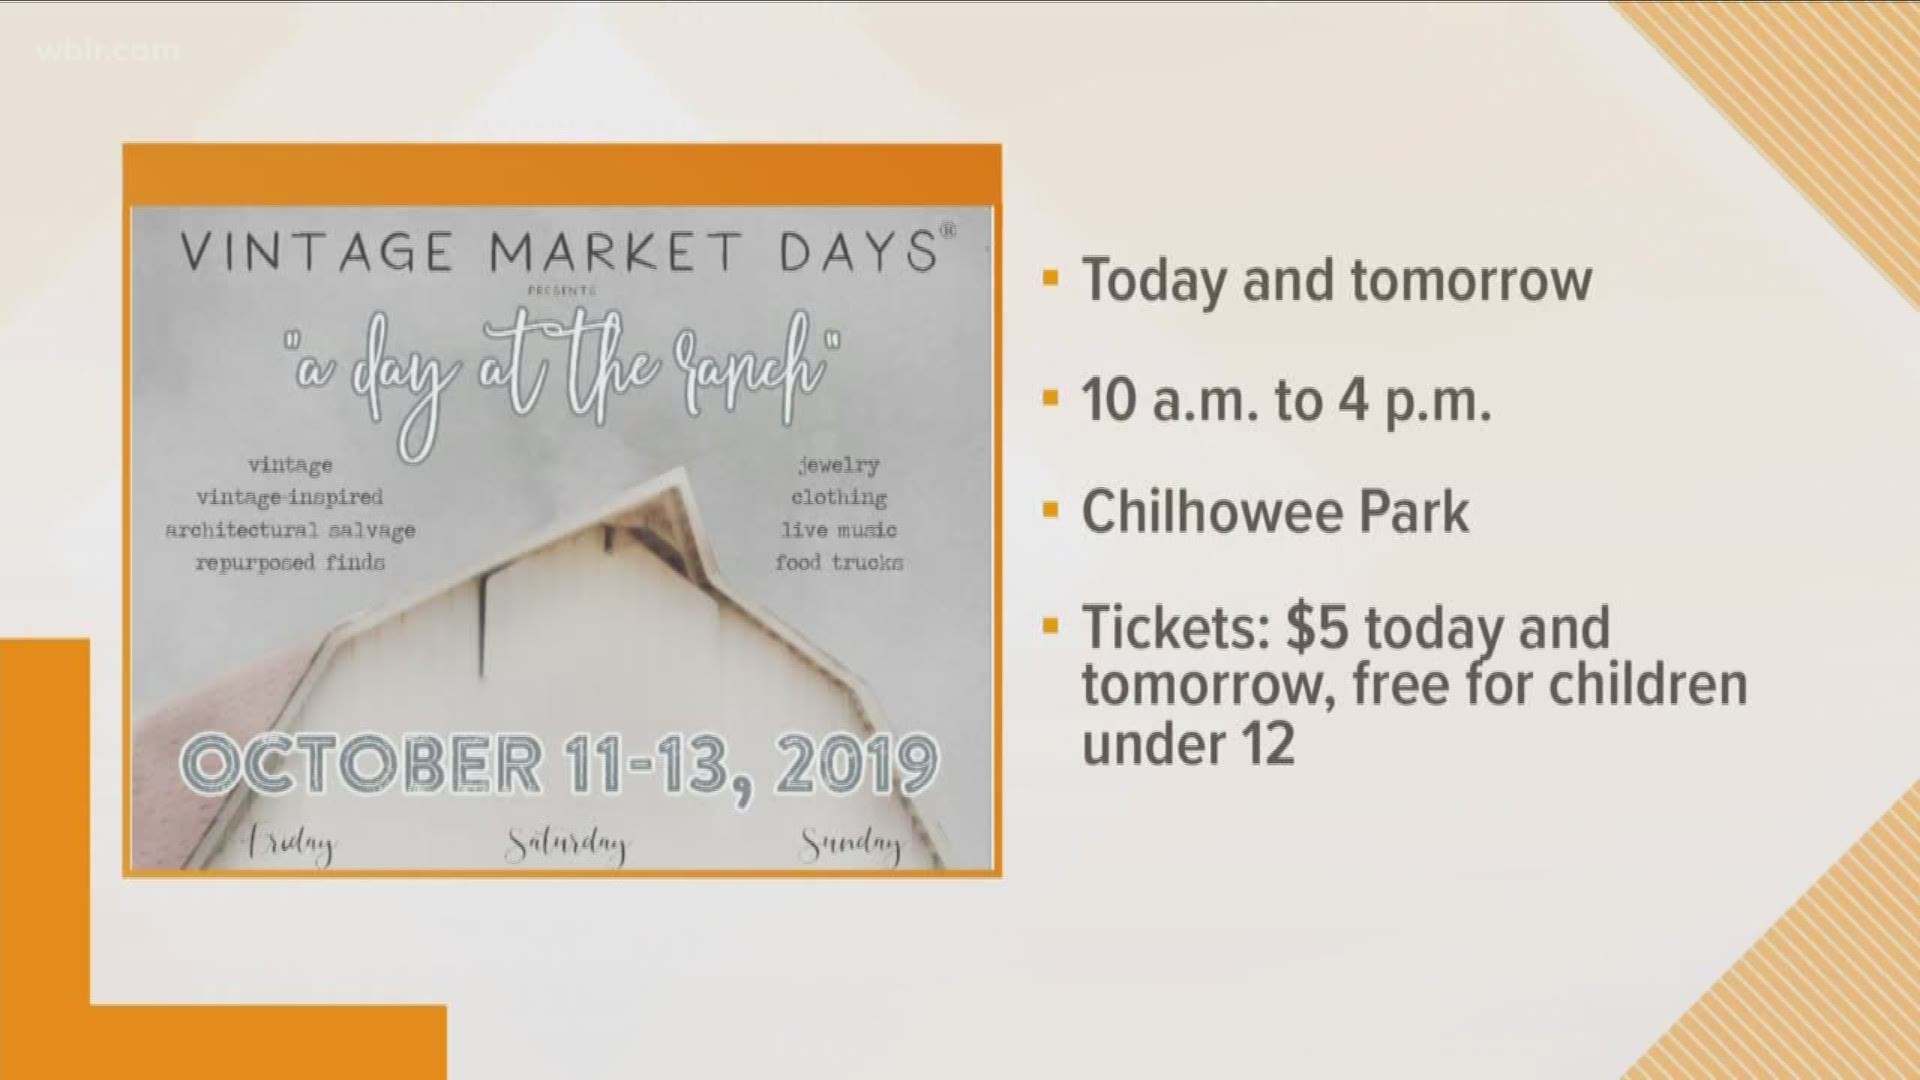 Vintage Market Days "A Day at the Ranch" theme going on this weekend at Chilhowee Park. Tickets are $5. Children 12 and under are free.